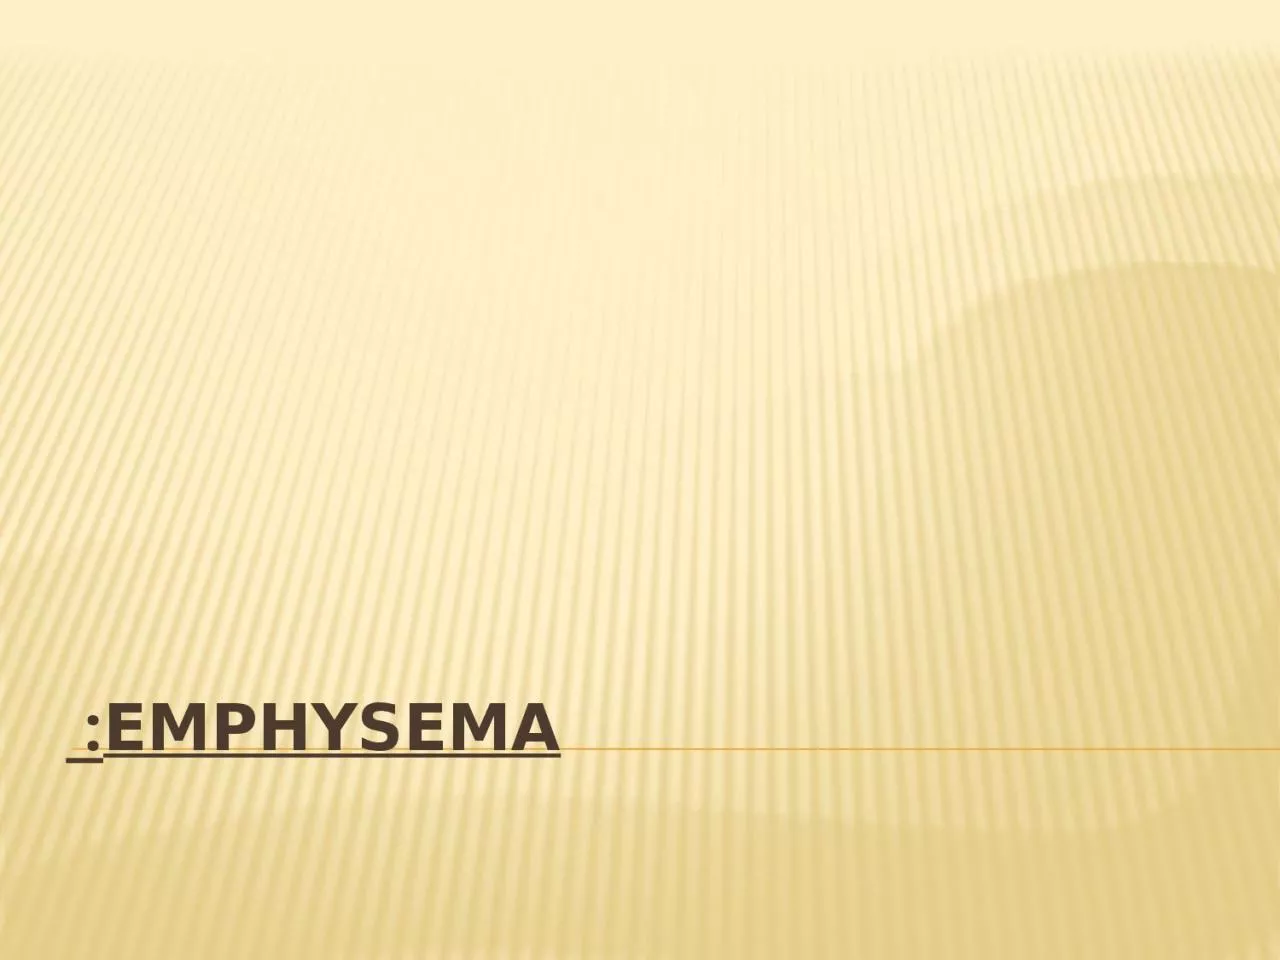 Emphysema:  It is characterized by loss of lung elasticity and abnormal enlargement of